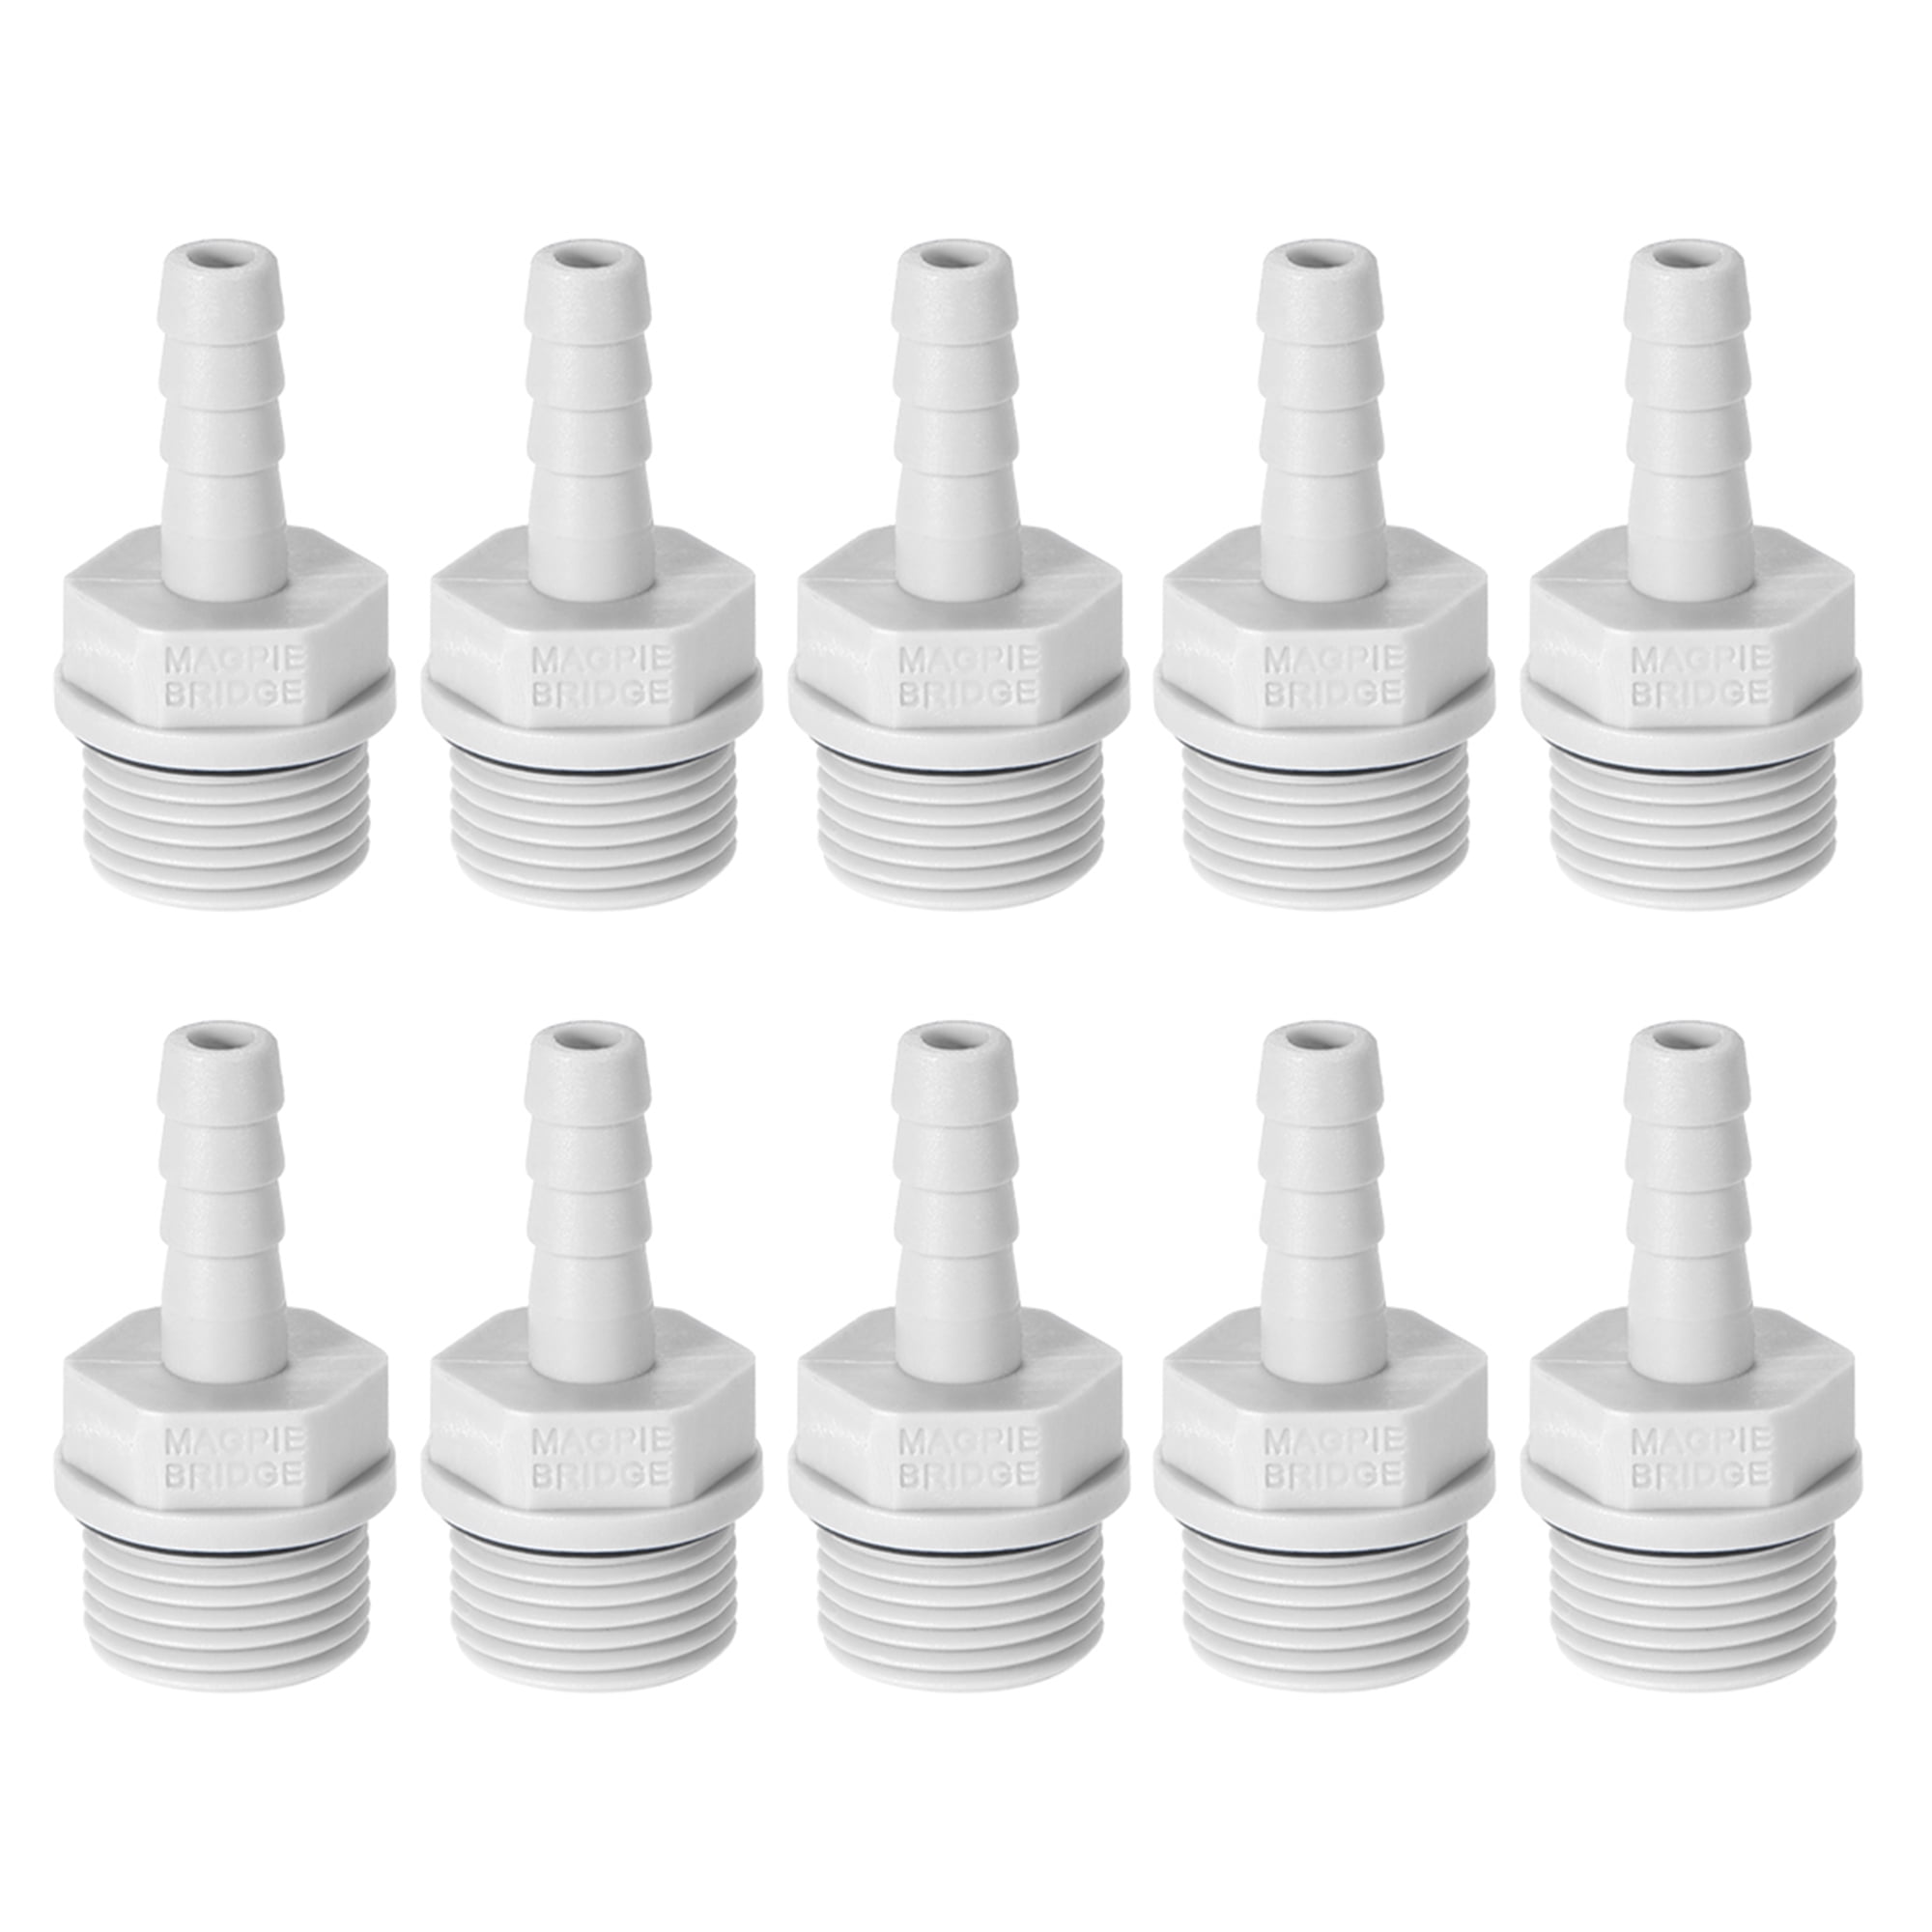 10x Tee connectors Barbed irrigation pipe fittings 13mm Automatic Watering 